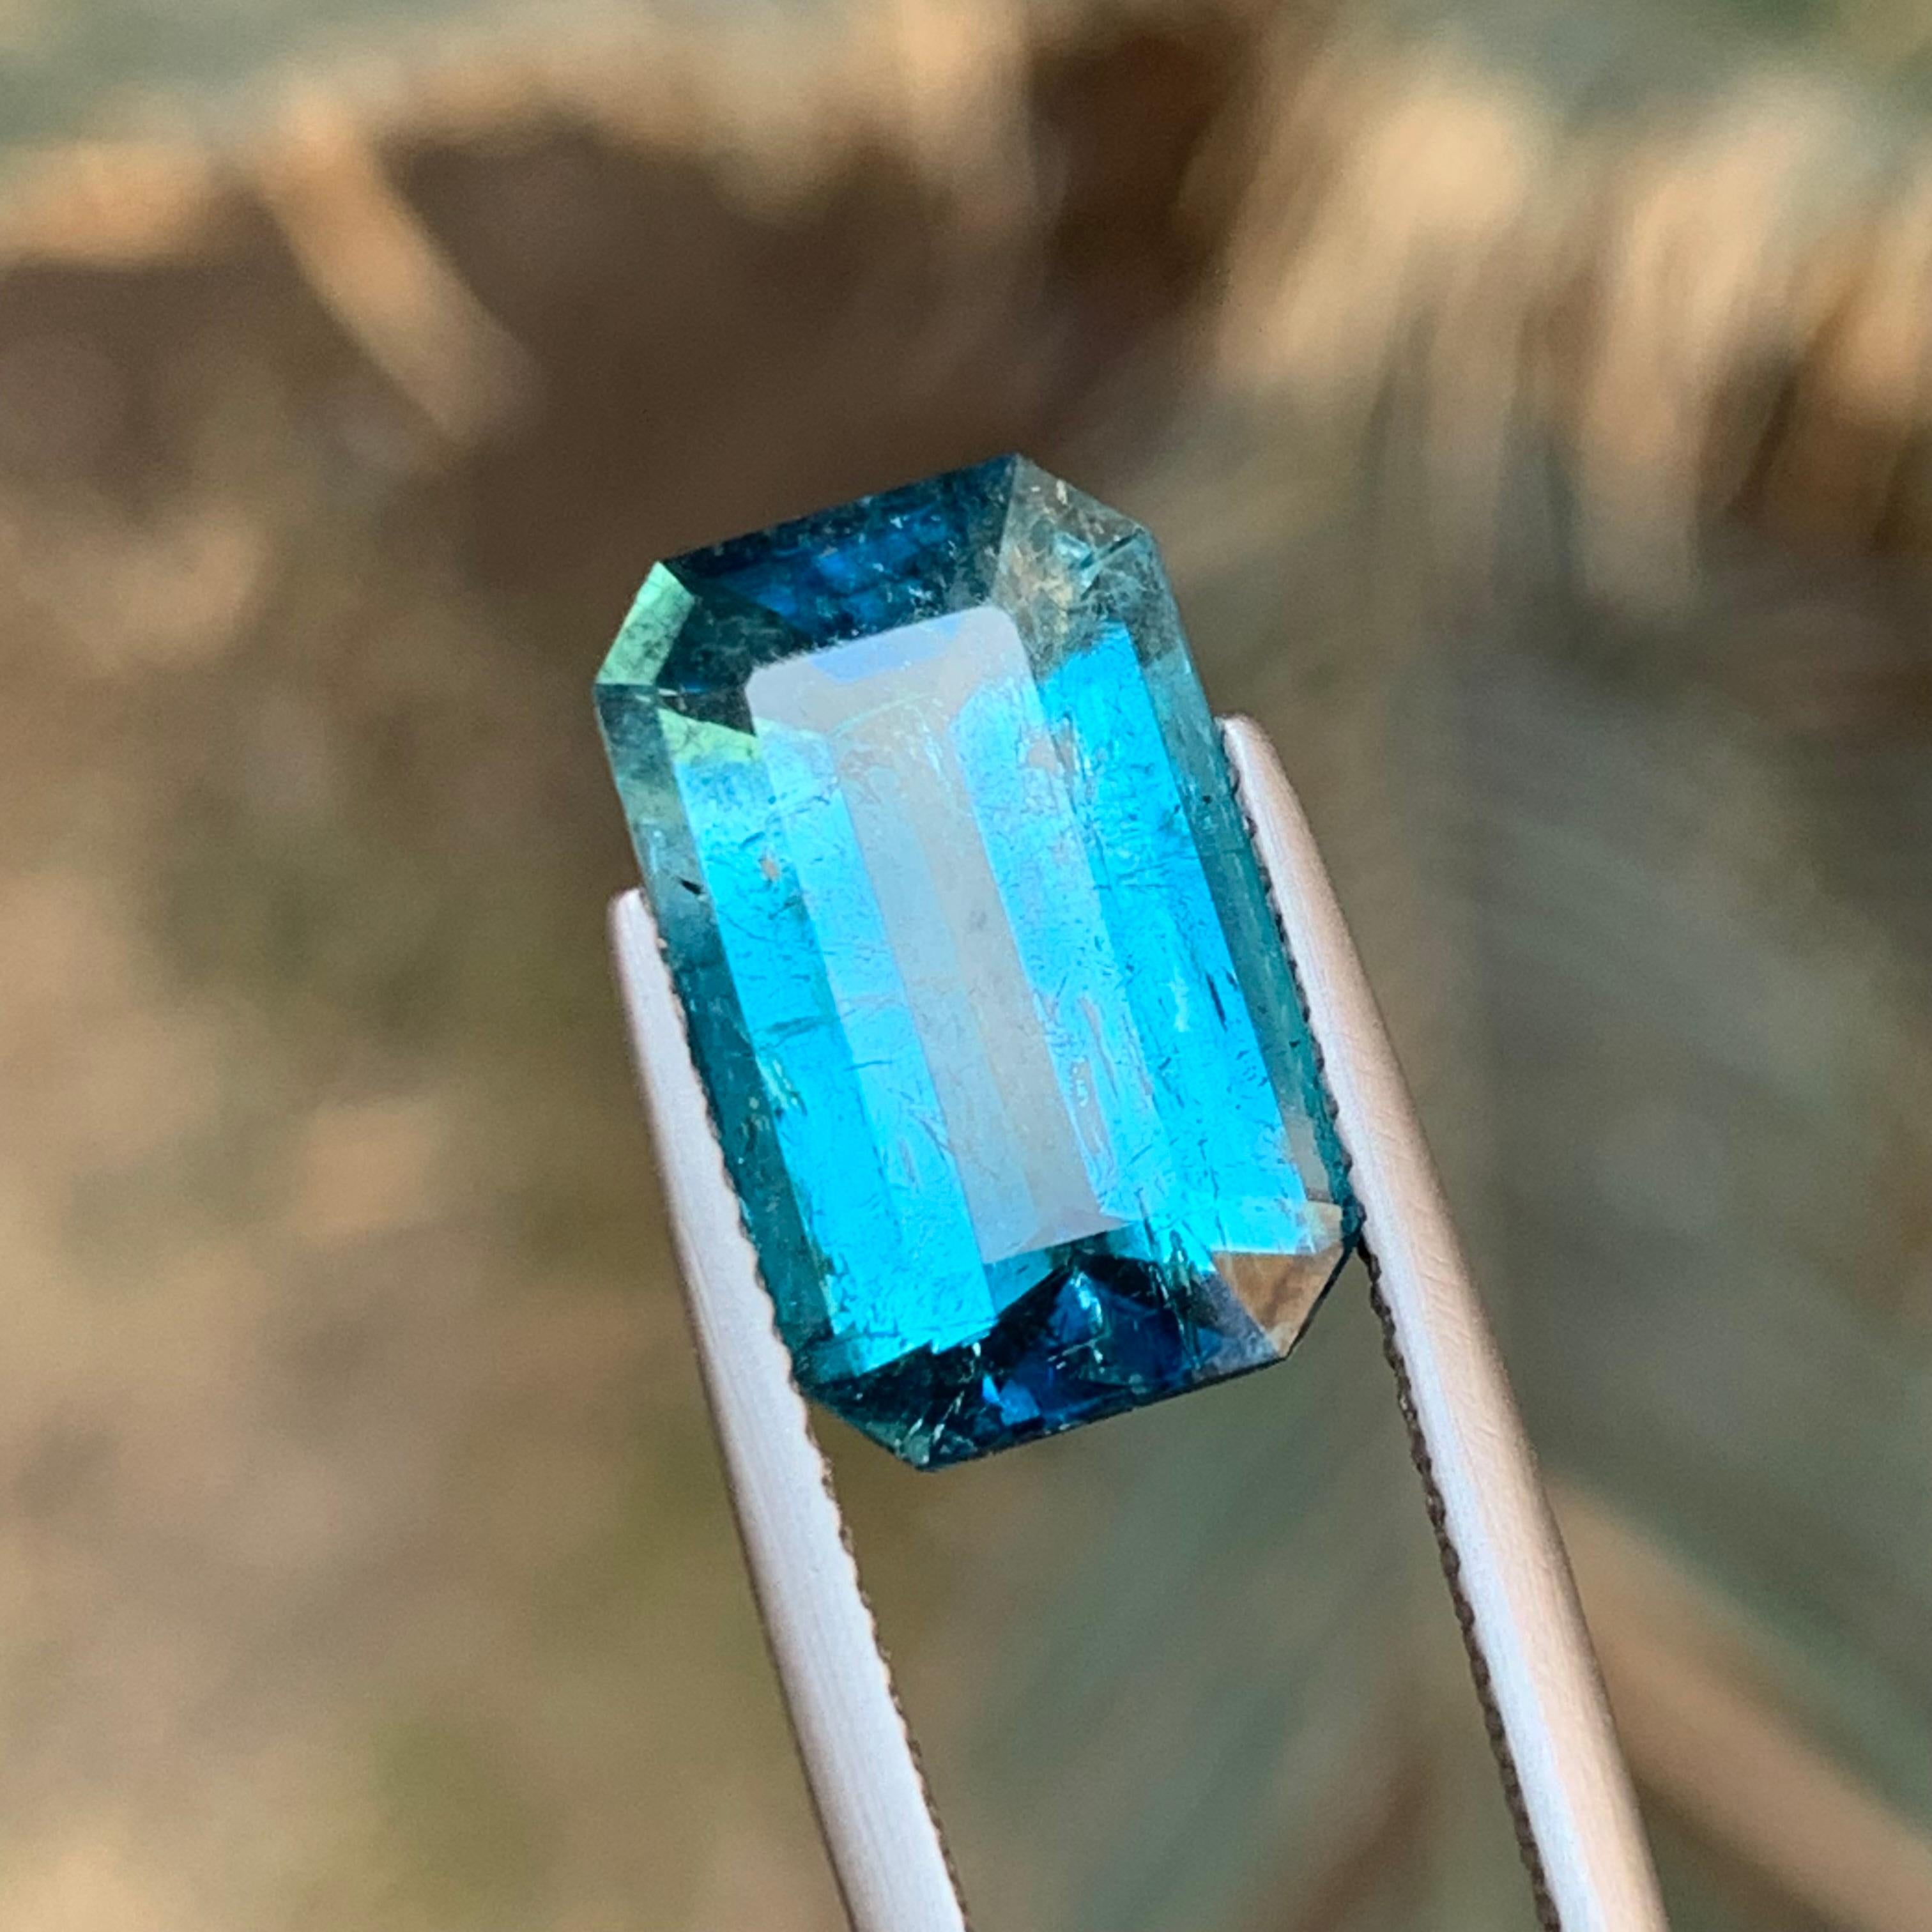 Rare Rich Electric Blue Tourmaline Gemstone 7.20 Ct Emerald Cut for Ring/Pendant For Sale 2